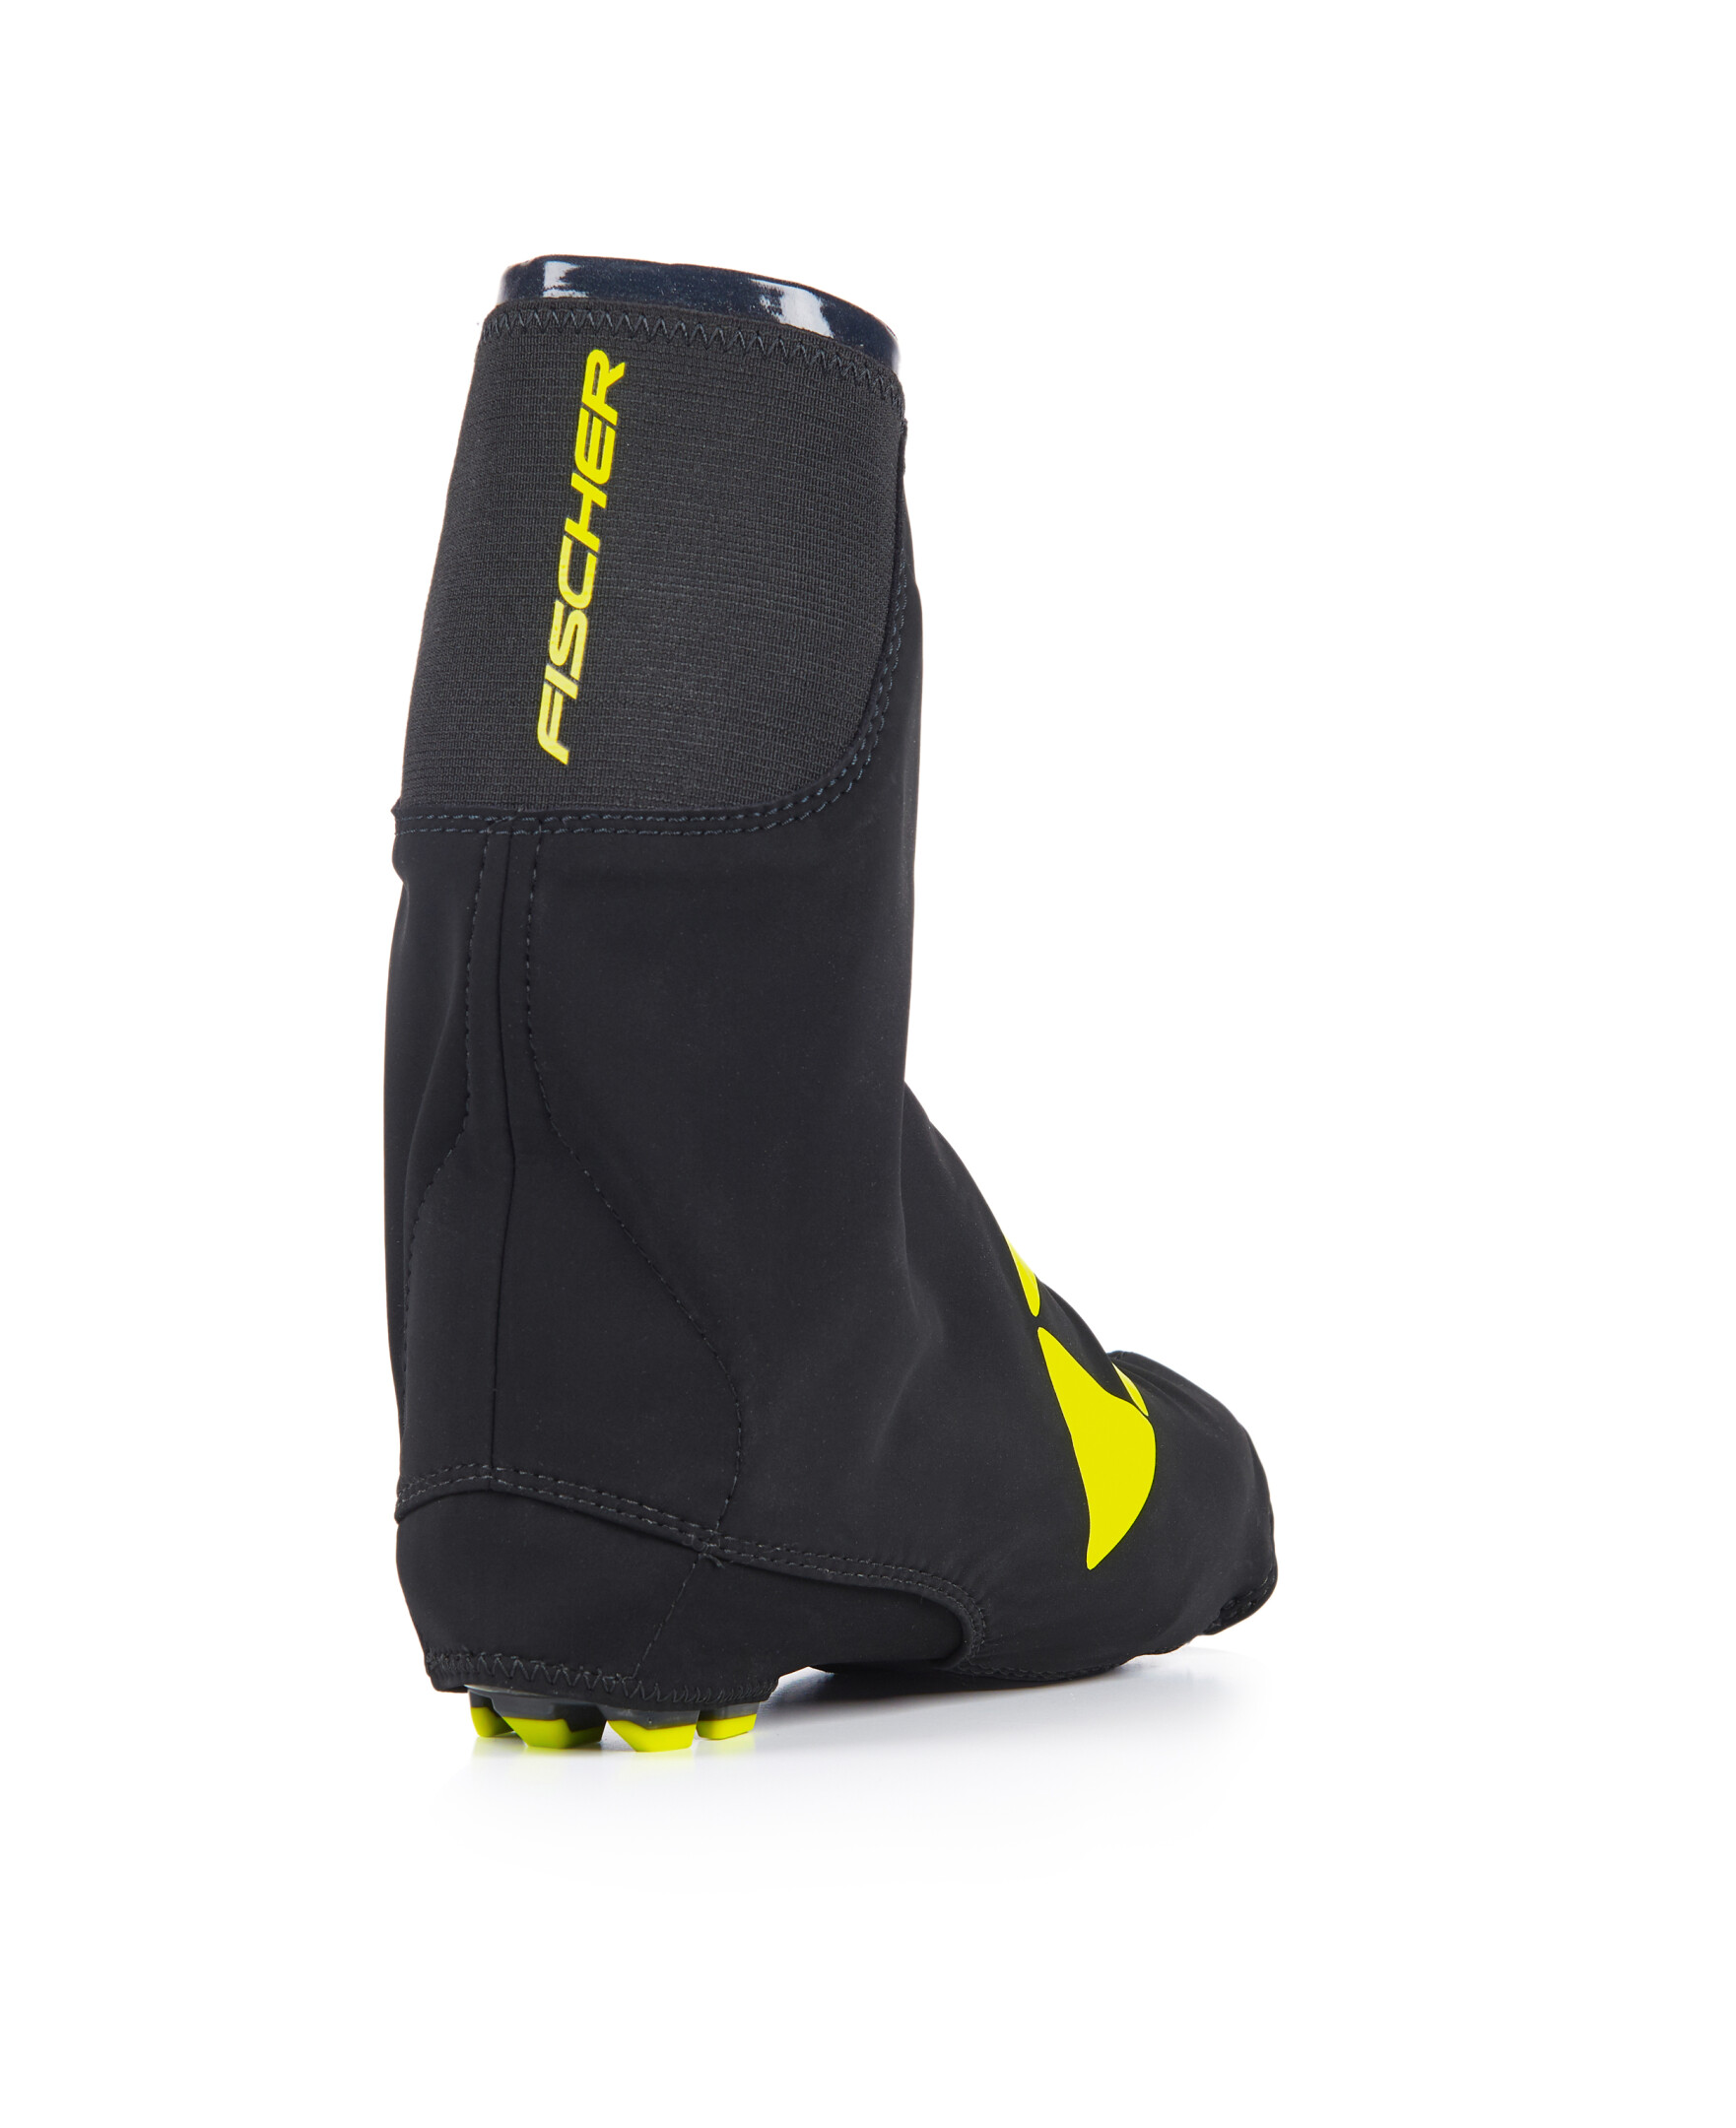 Bootcover Race | Fischersports - Germany (German)